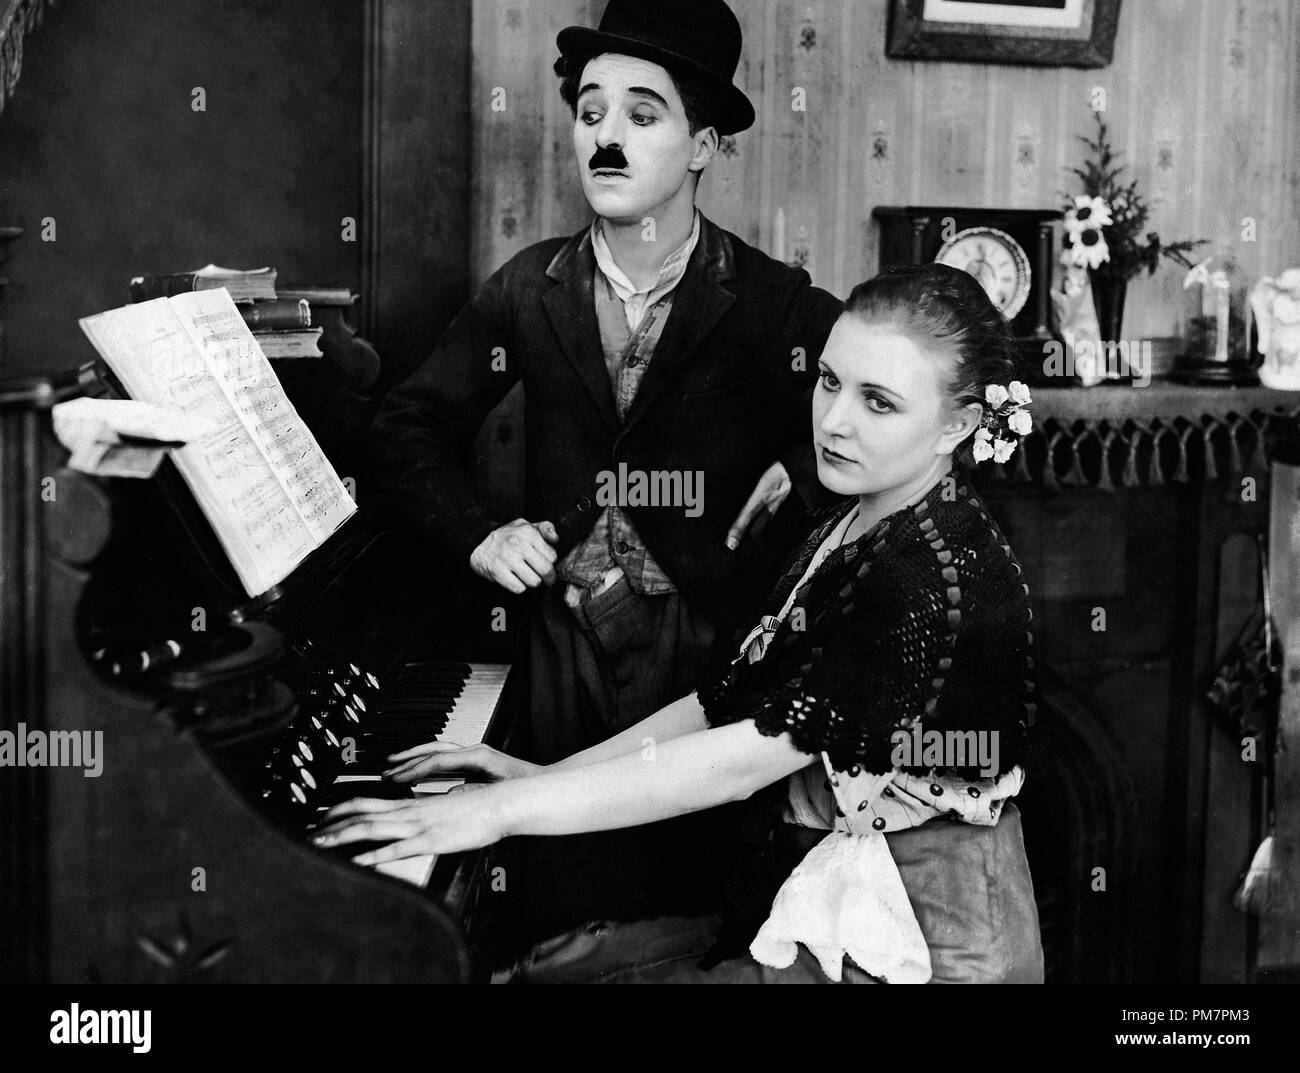 Studio Publicity Still: 'Sunnyside'  Charles Chaplin  1919 First National          File Reference # 31386 1004THA Stock Photo